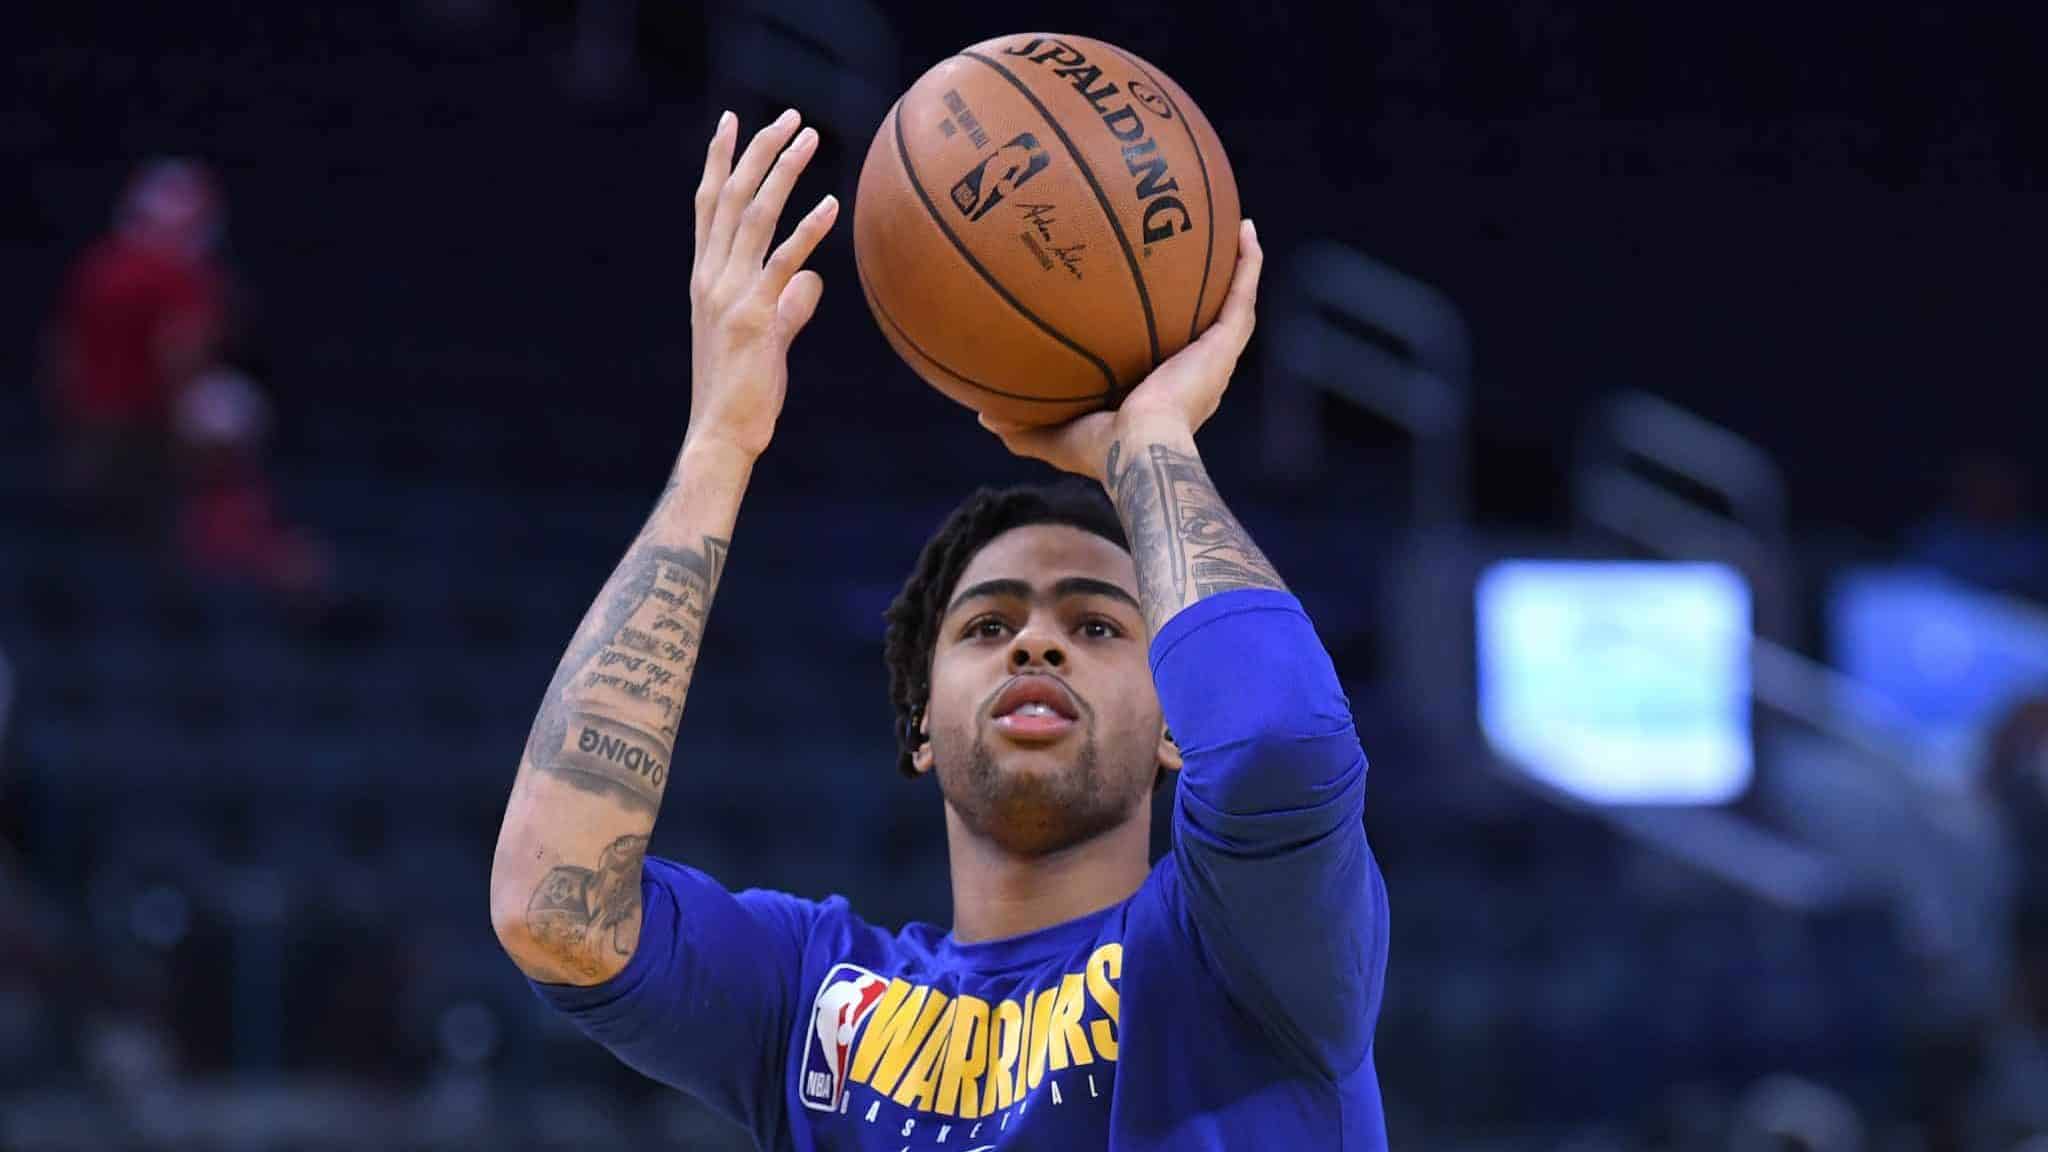 SAN FRANCISCO, CALIFORNIA - DECEMBER 25: D'Angelo Russell #0 of the Golden State Warriors warms up prior to the start of an NBA basketball game against the Houston Rockets at Chase Center on December 25, 2019 in San Francisco, California.